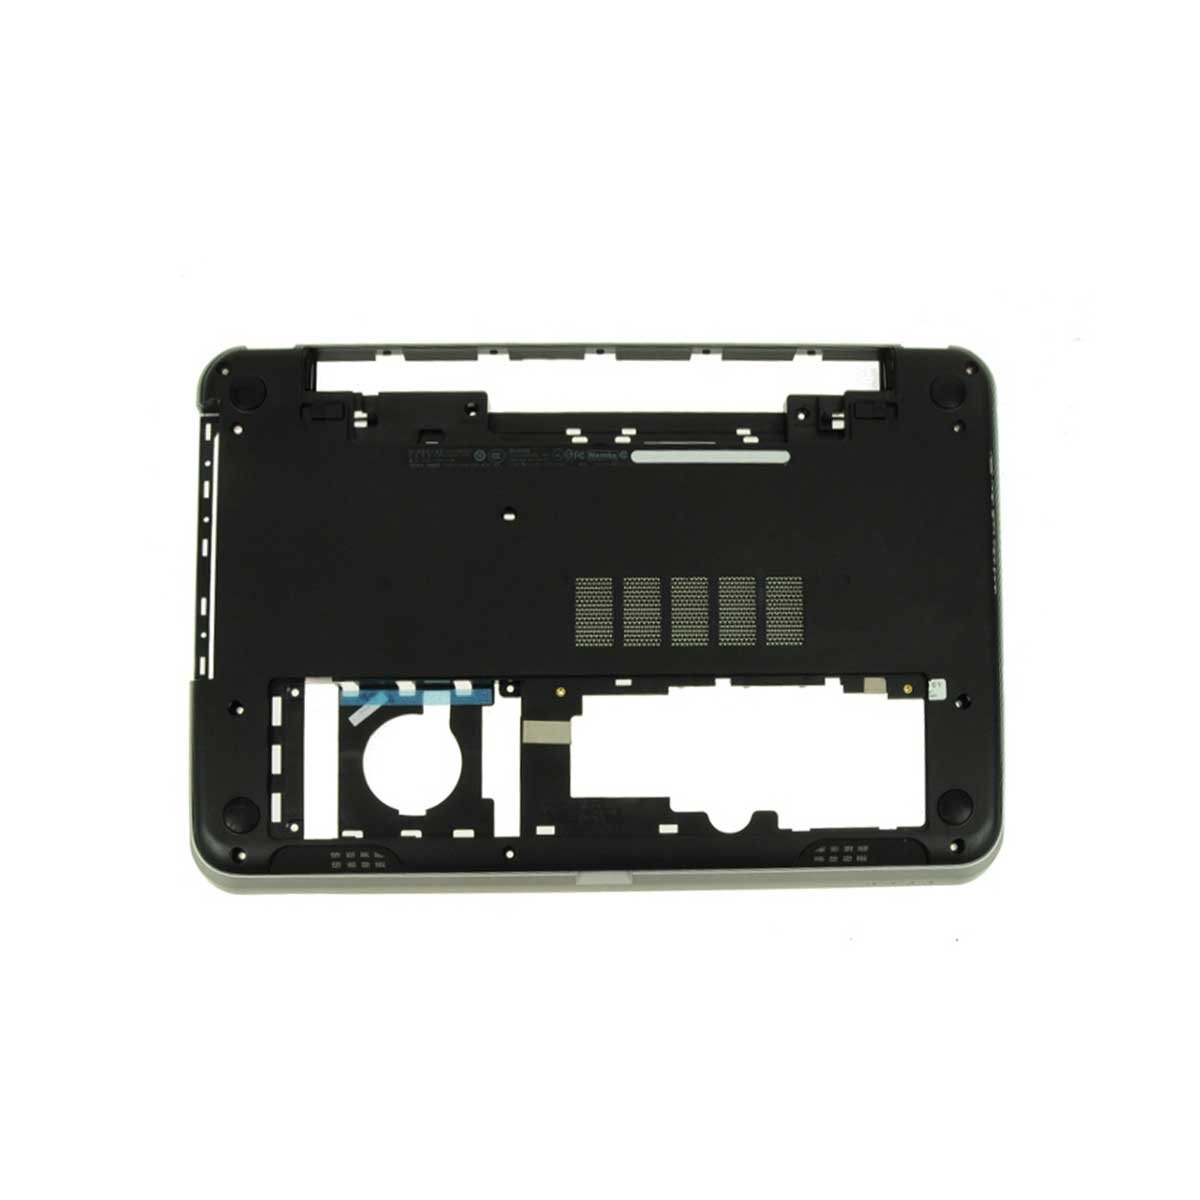 Dell Inspiron 15r 5537 OEM Laptop Bottom Base Lower Case Assembly D Cover P/N T74CH, 0T74CH